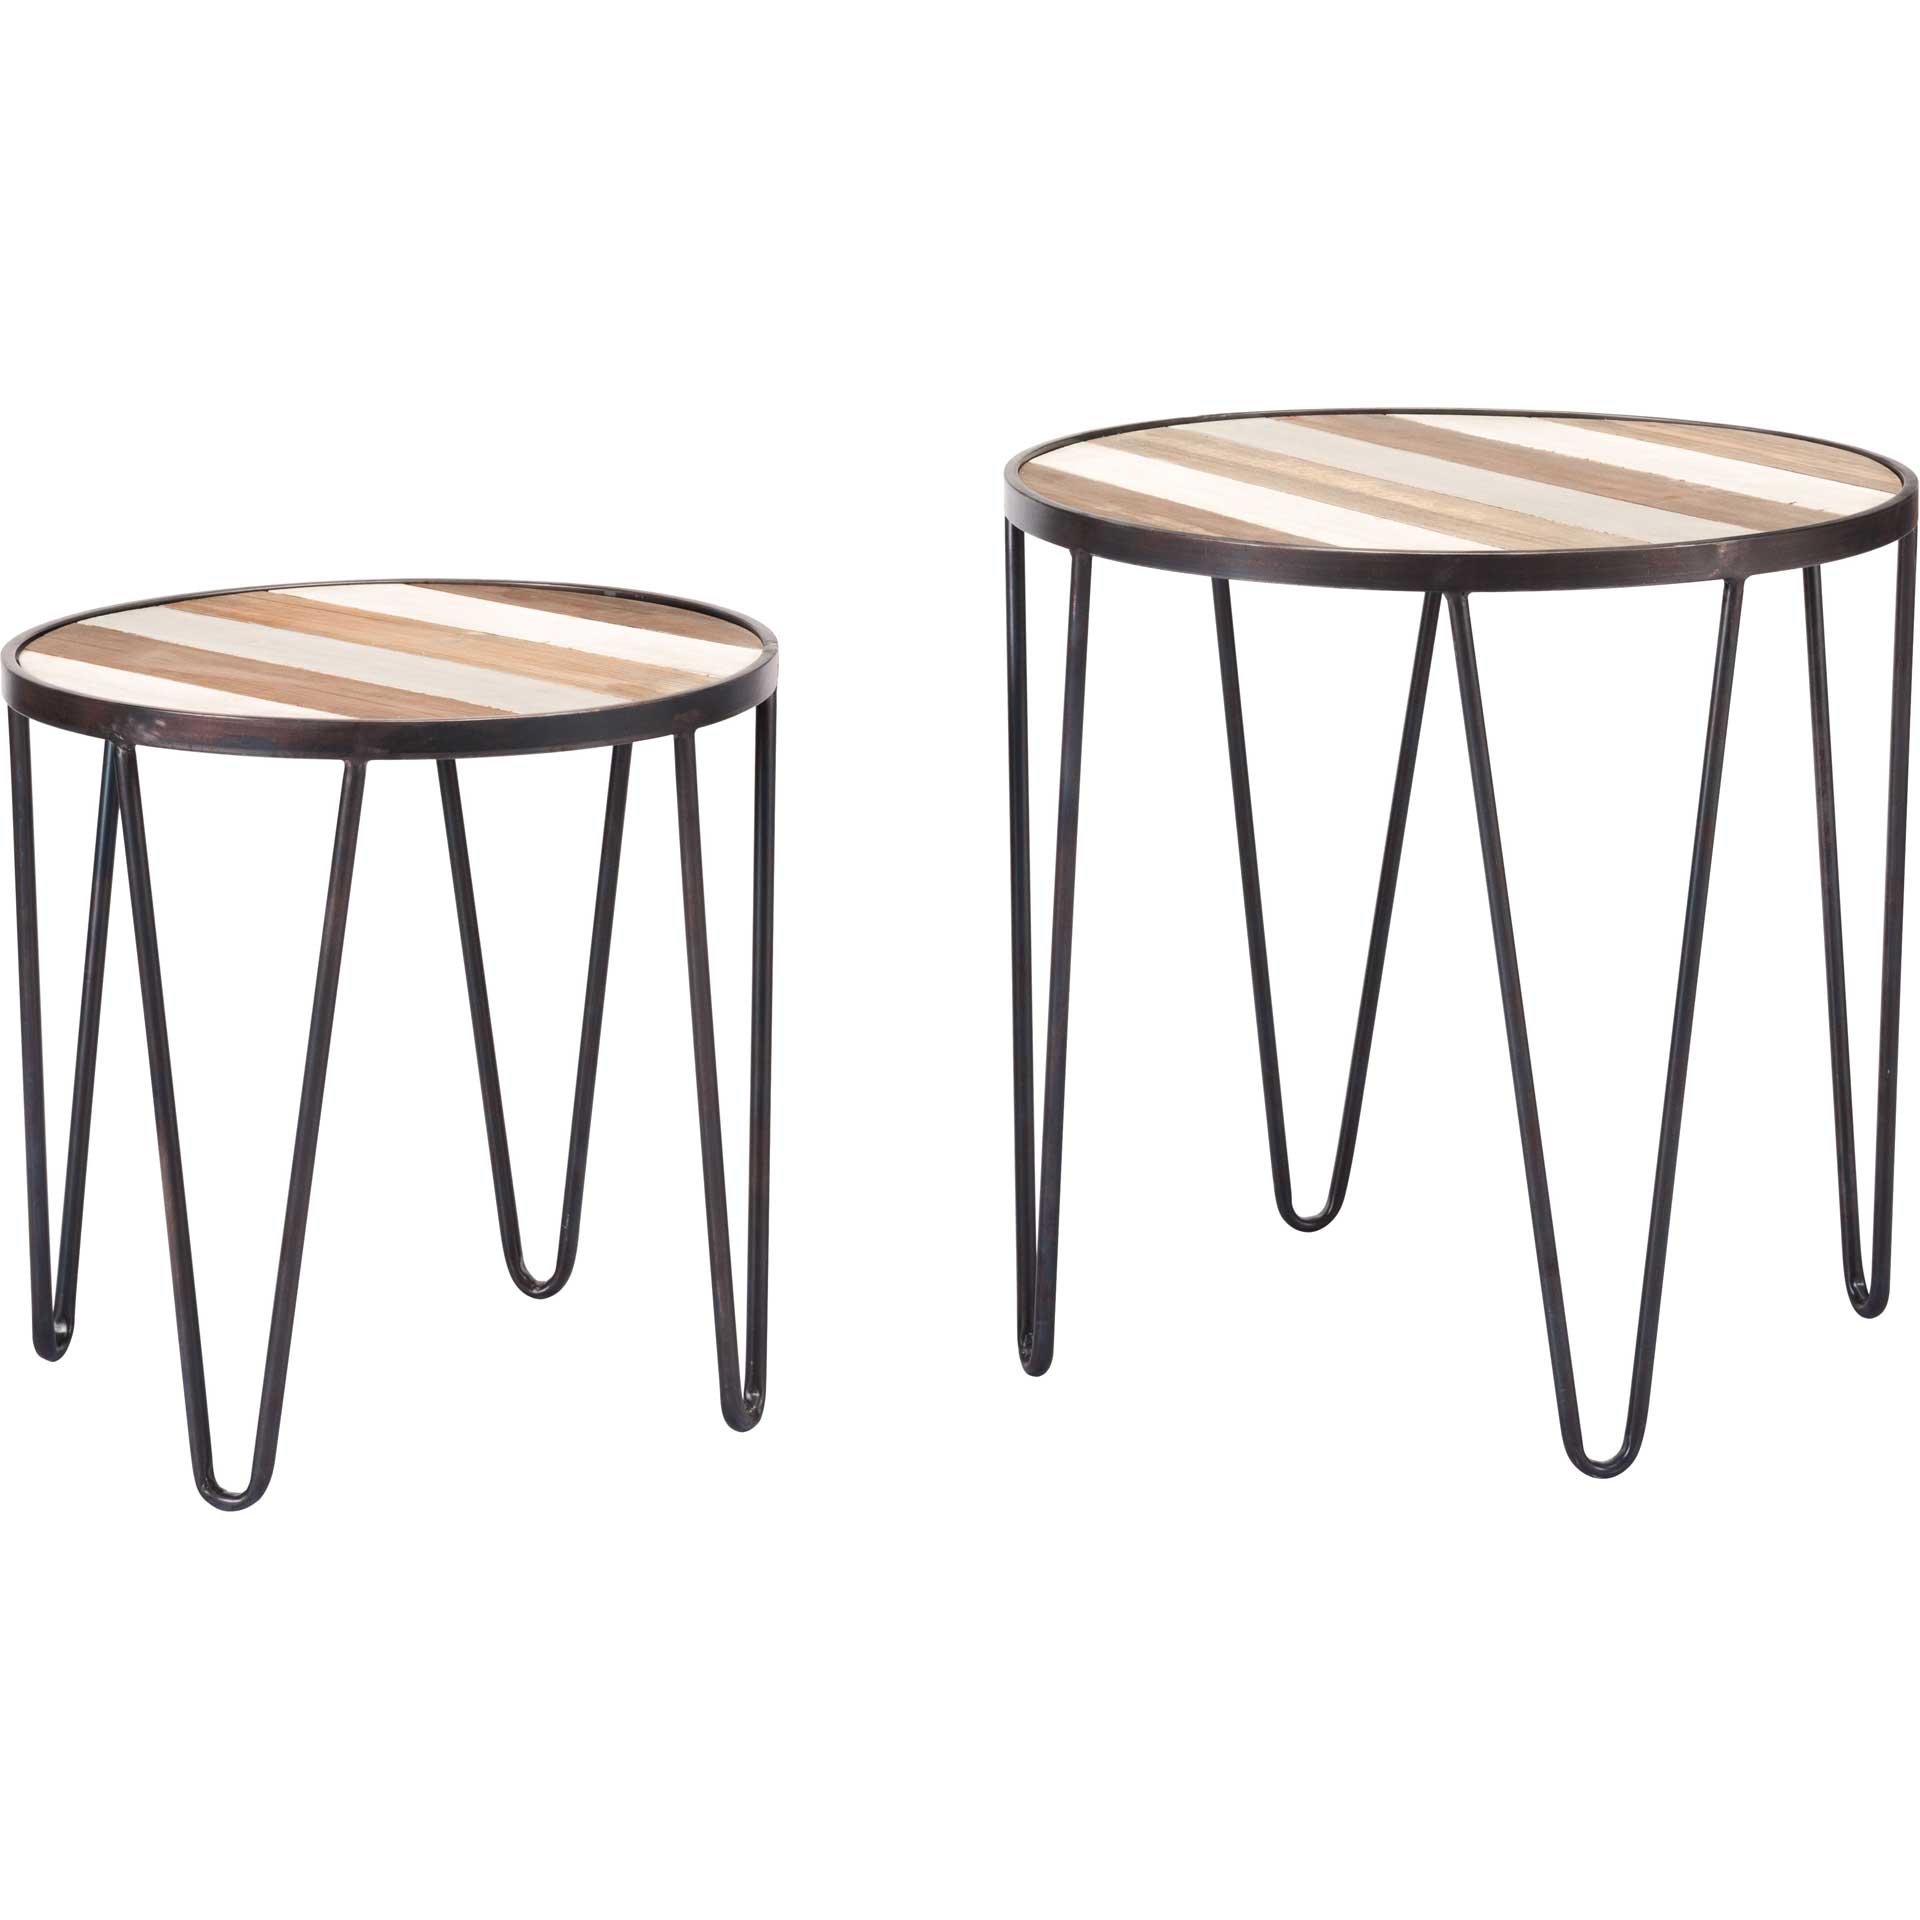 Striped Wood Tray Table Antique (Set of 2)